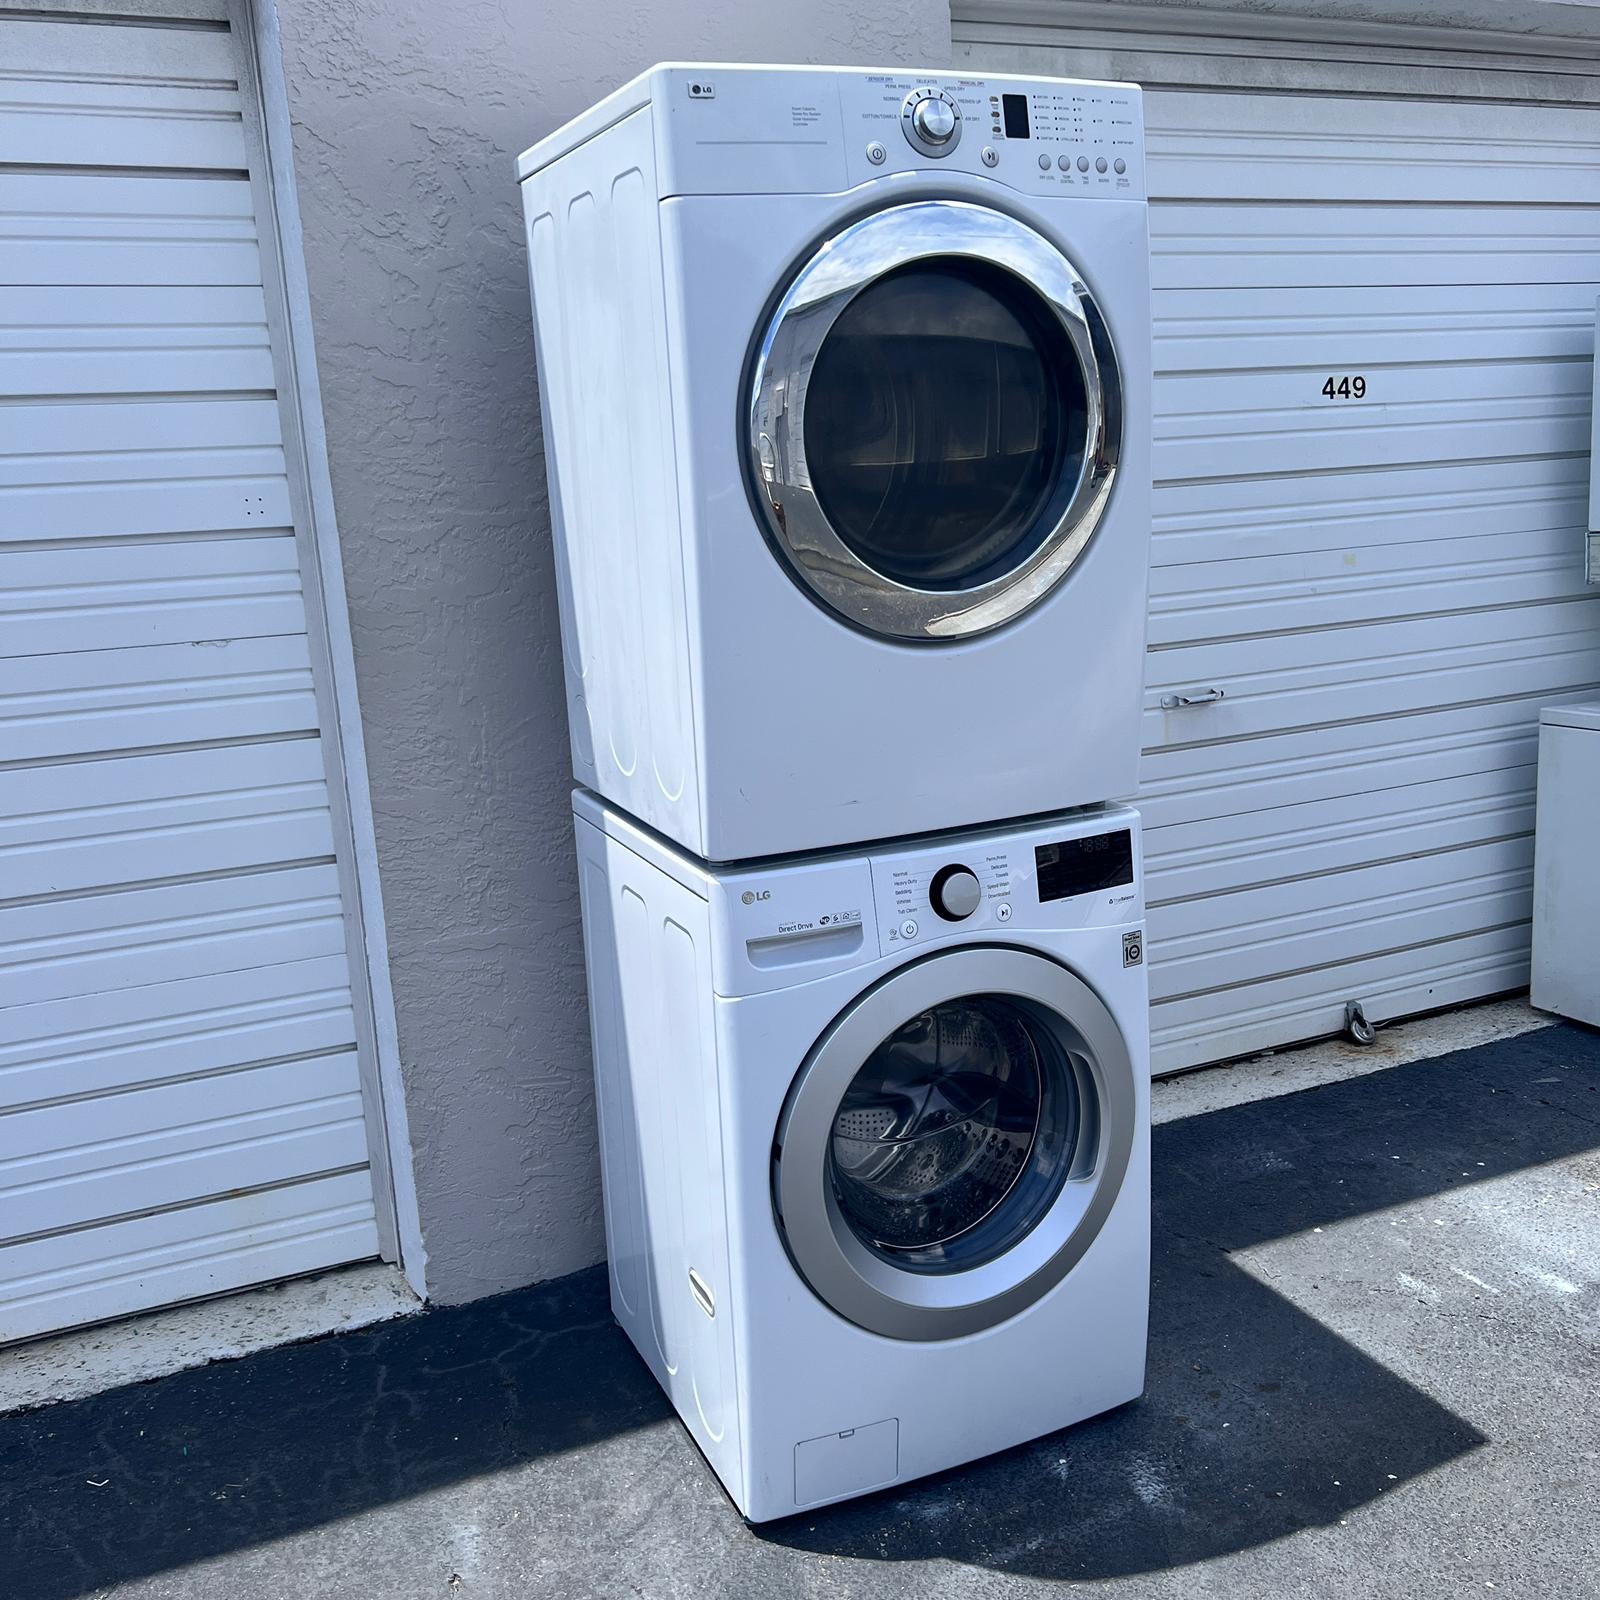 LG Washer and Dryer Front Load